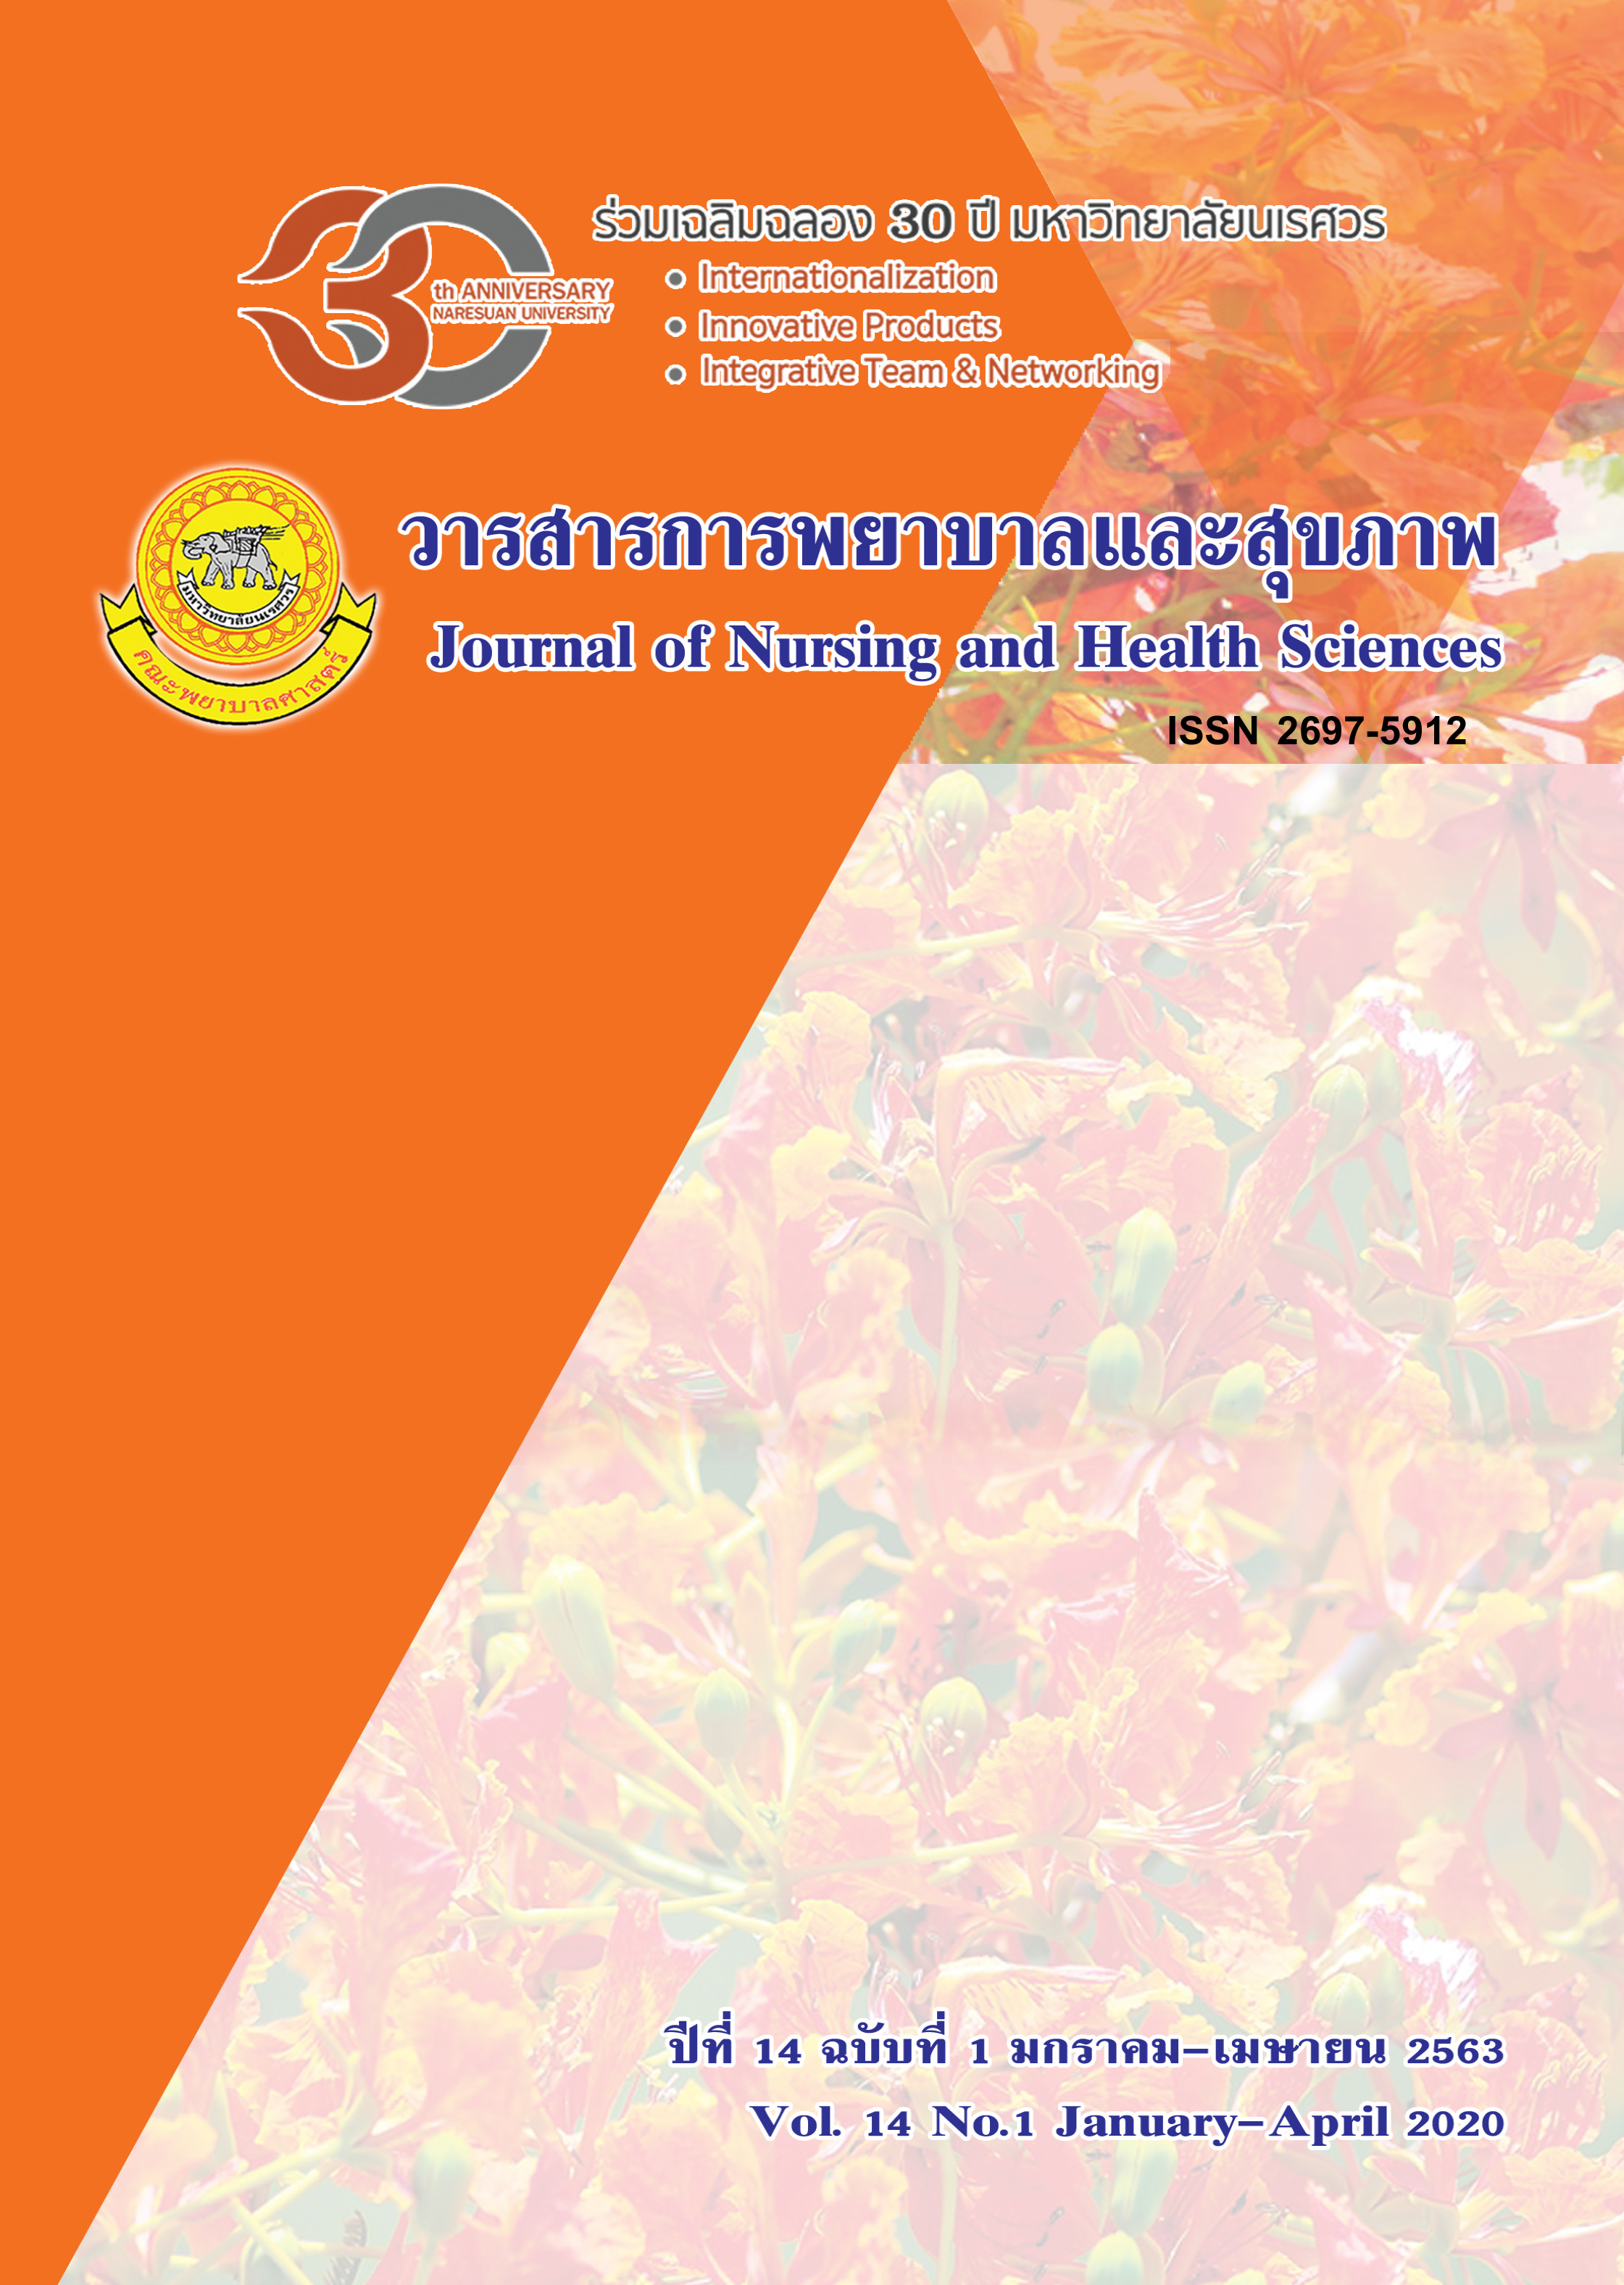 					View Vol. 14 No. 1 (2020): Journal of Nursing and Health Sciences
				